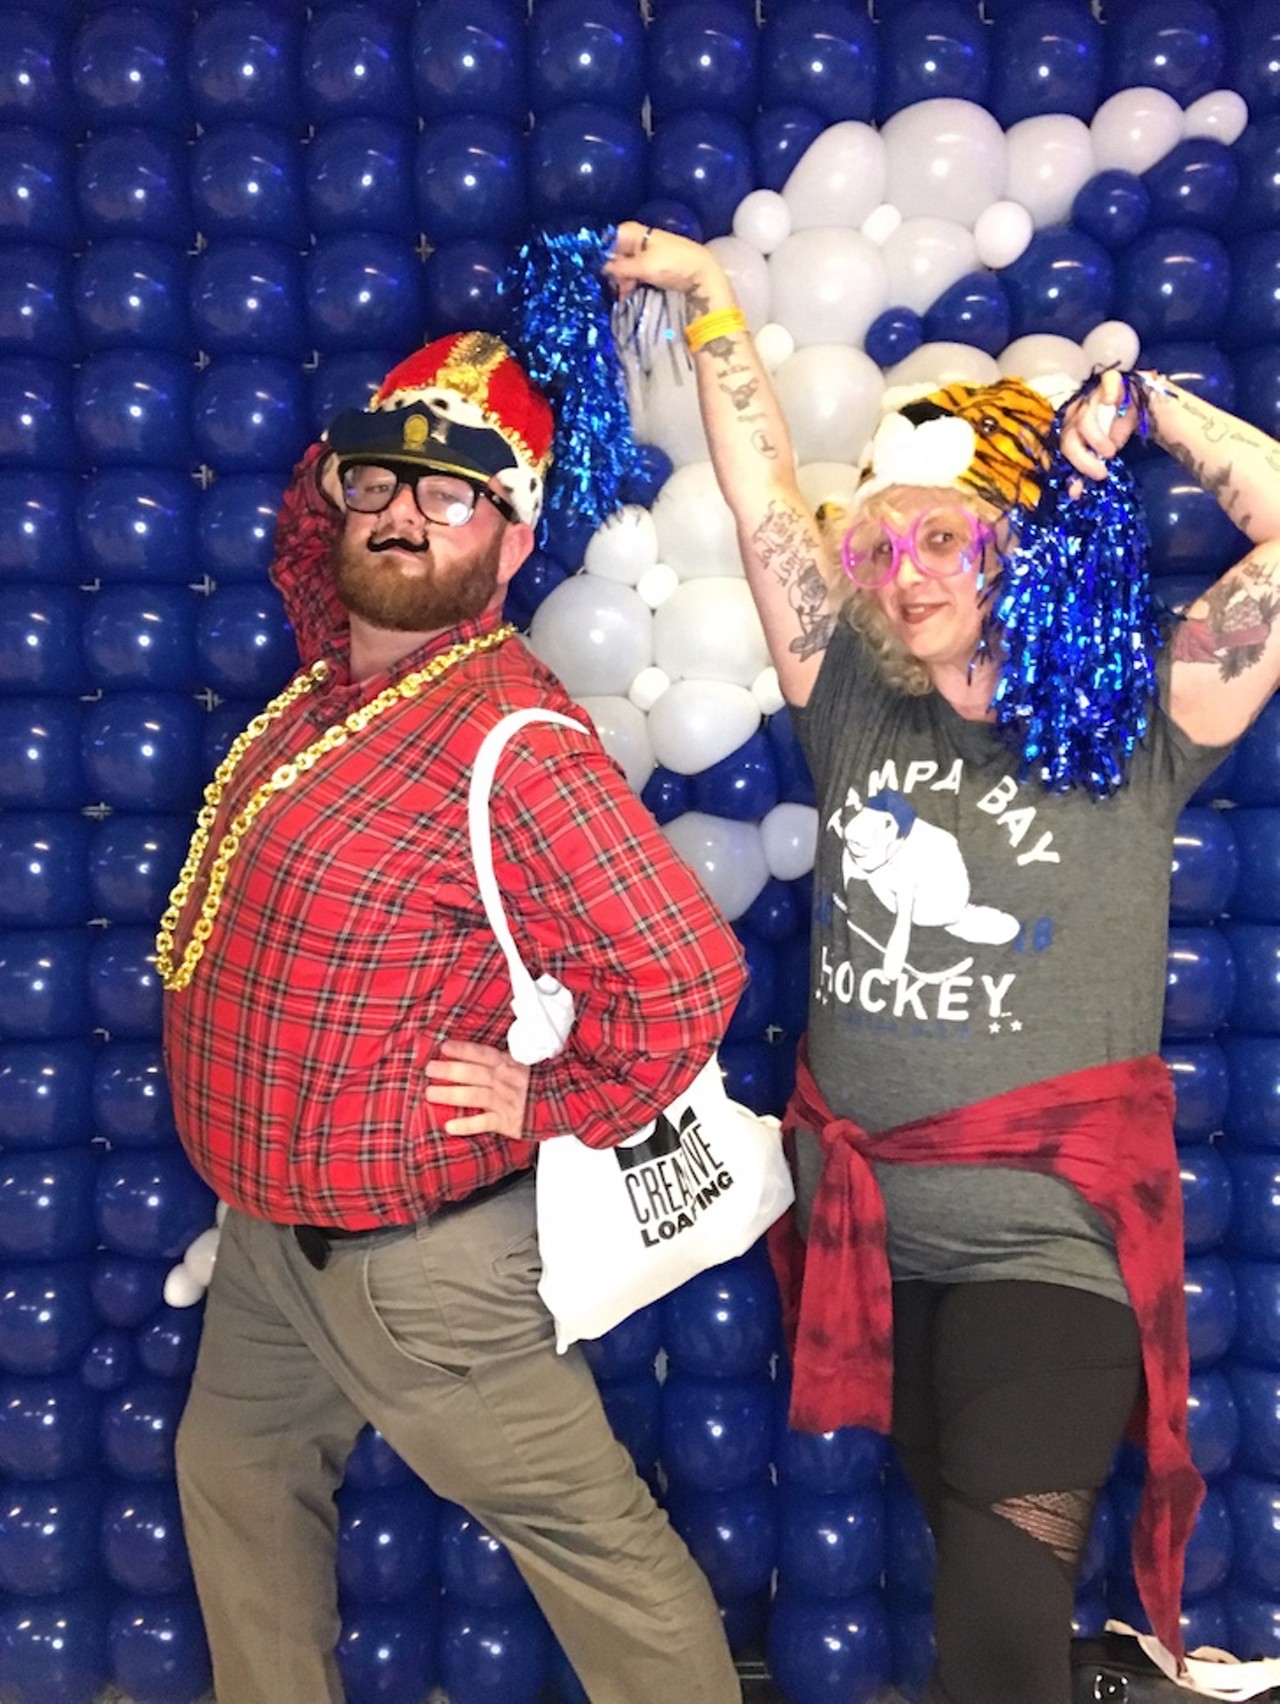 Photos from the 2019 Bolts Brew Fest photo booth